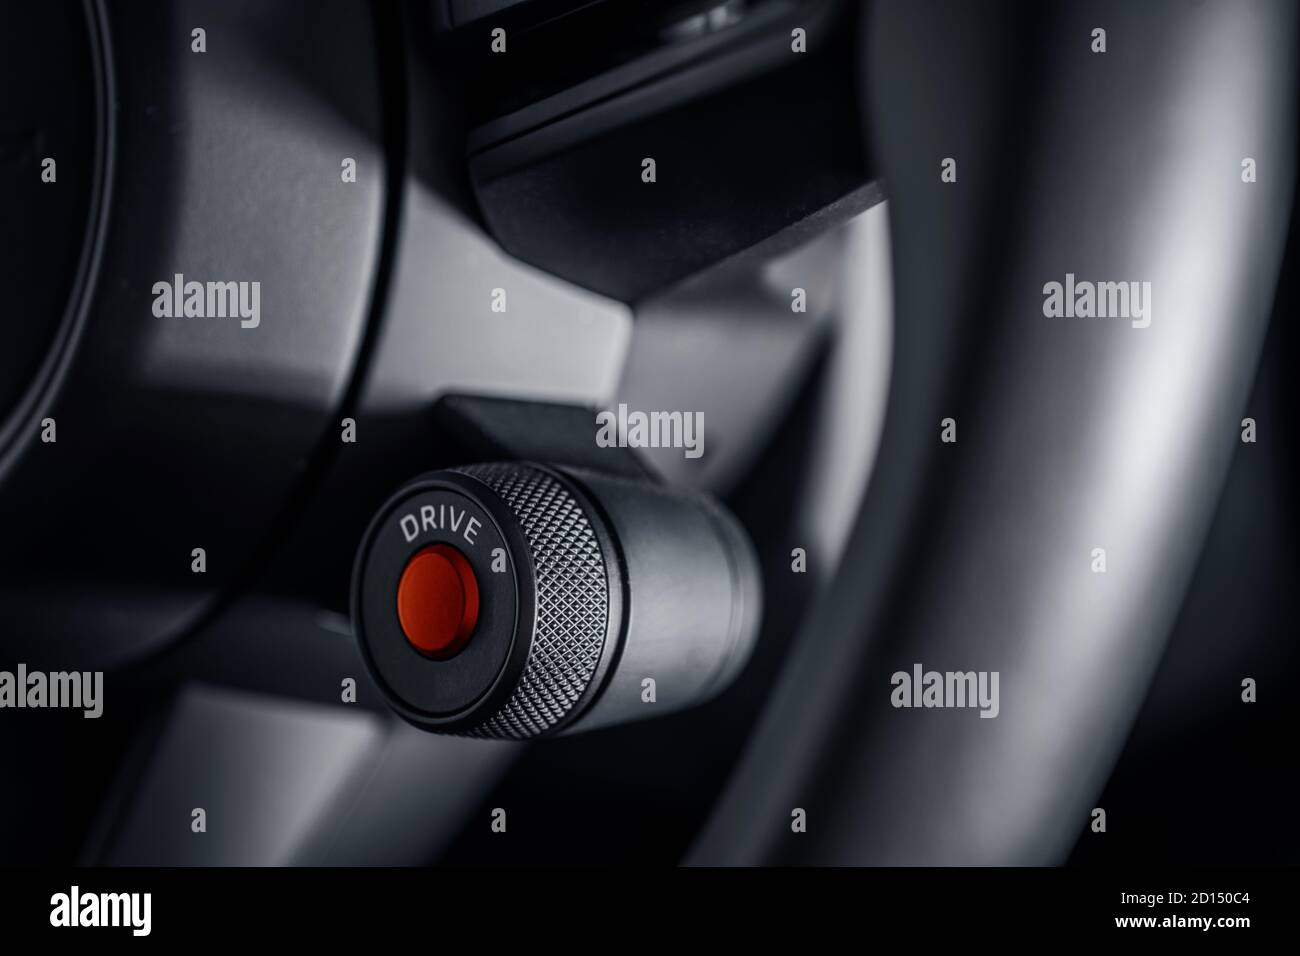 Supercar Engine Ignition Red Push Button Start on the Vehicle Steering Wheel Close Up. Modern Automotive Theme. Stock Photo